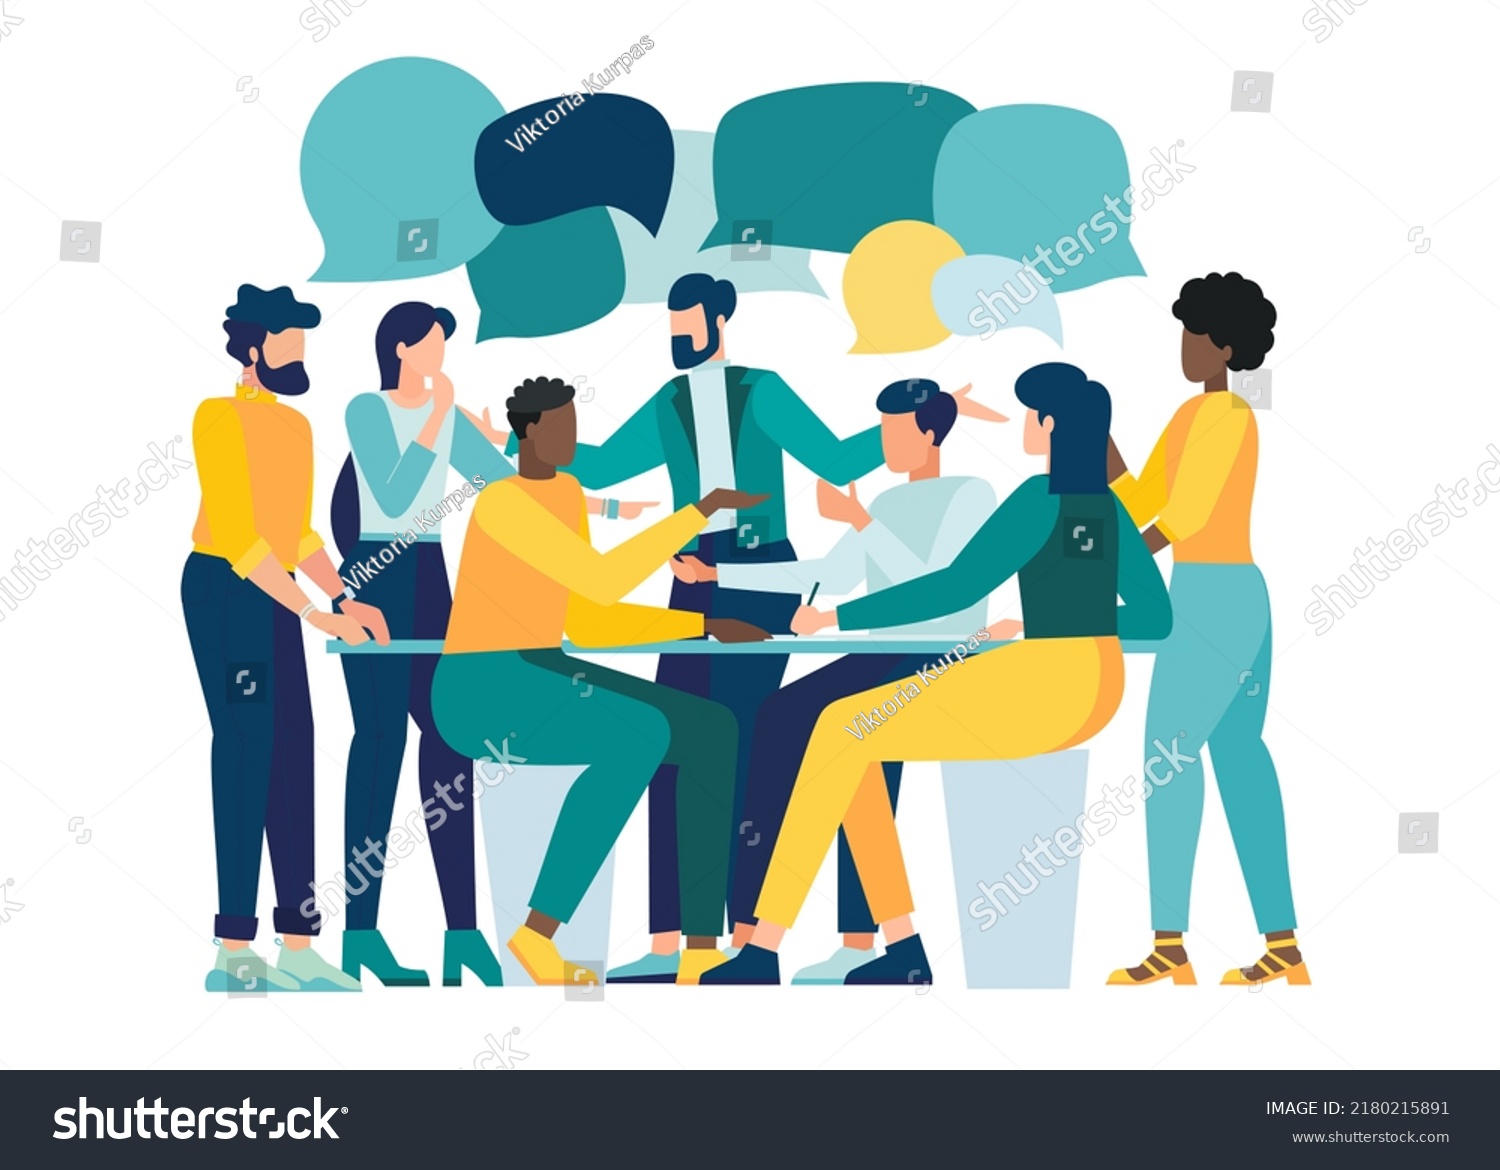 SVG of Discussion, conversation with speech bubbles. illustration brainstorming for idea, meeting opinion concept, discussing work in meeting and talk with speech bubbles. business time debate over work idea svg